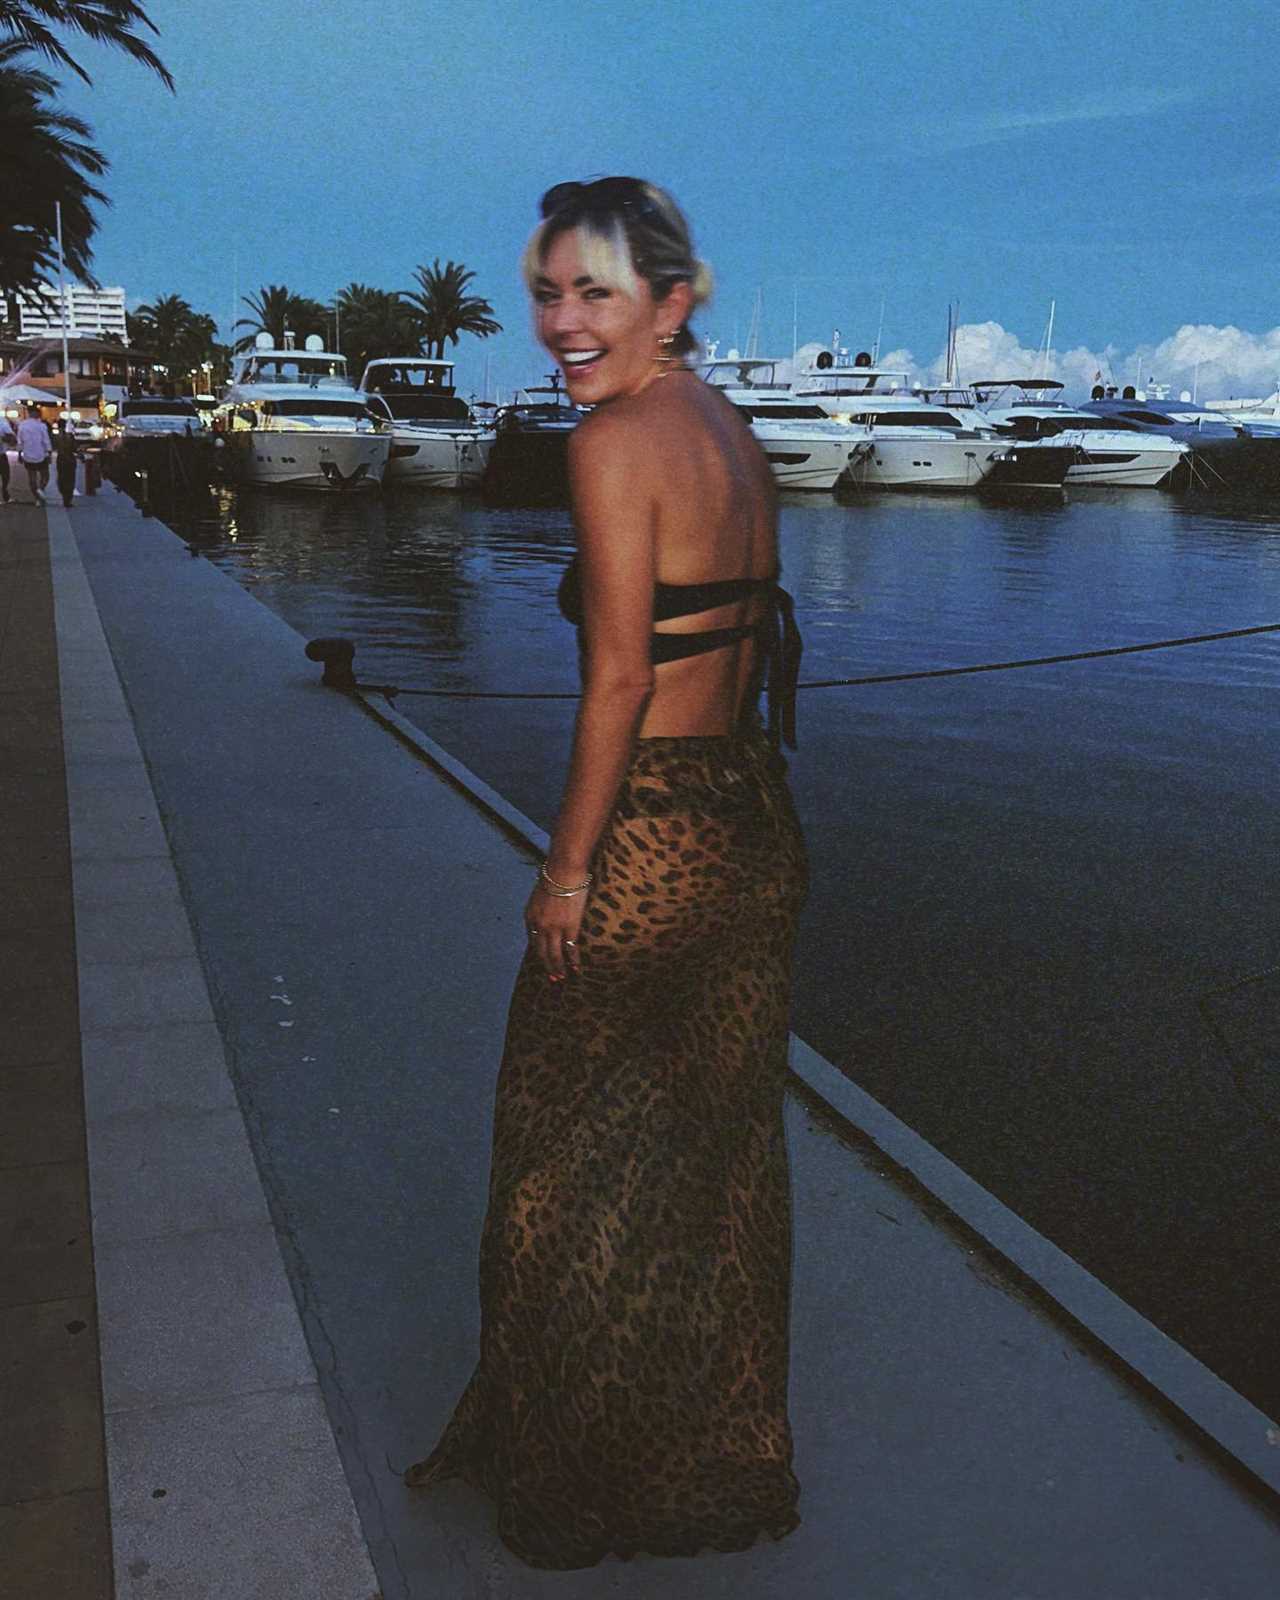 A Place in the Sun’s Danni Menzies Stuns Fans with Daring Holiday Outfit